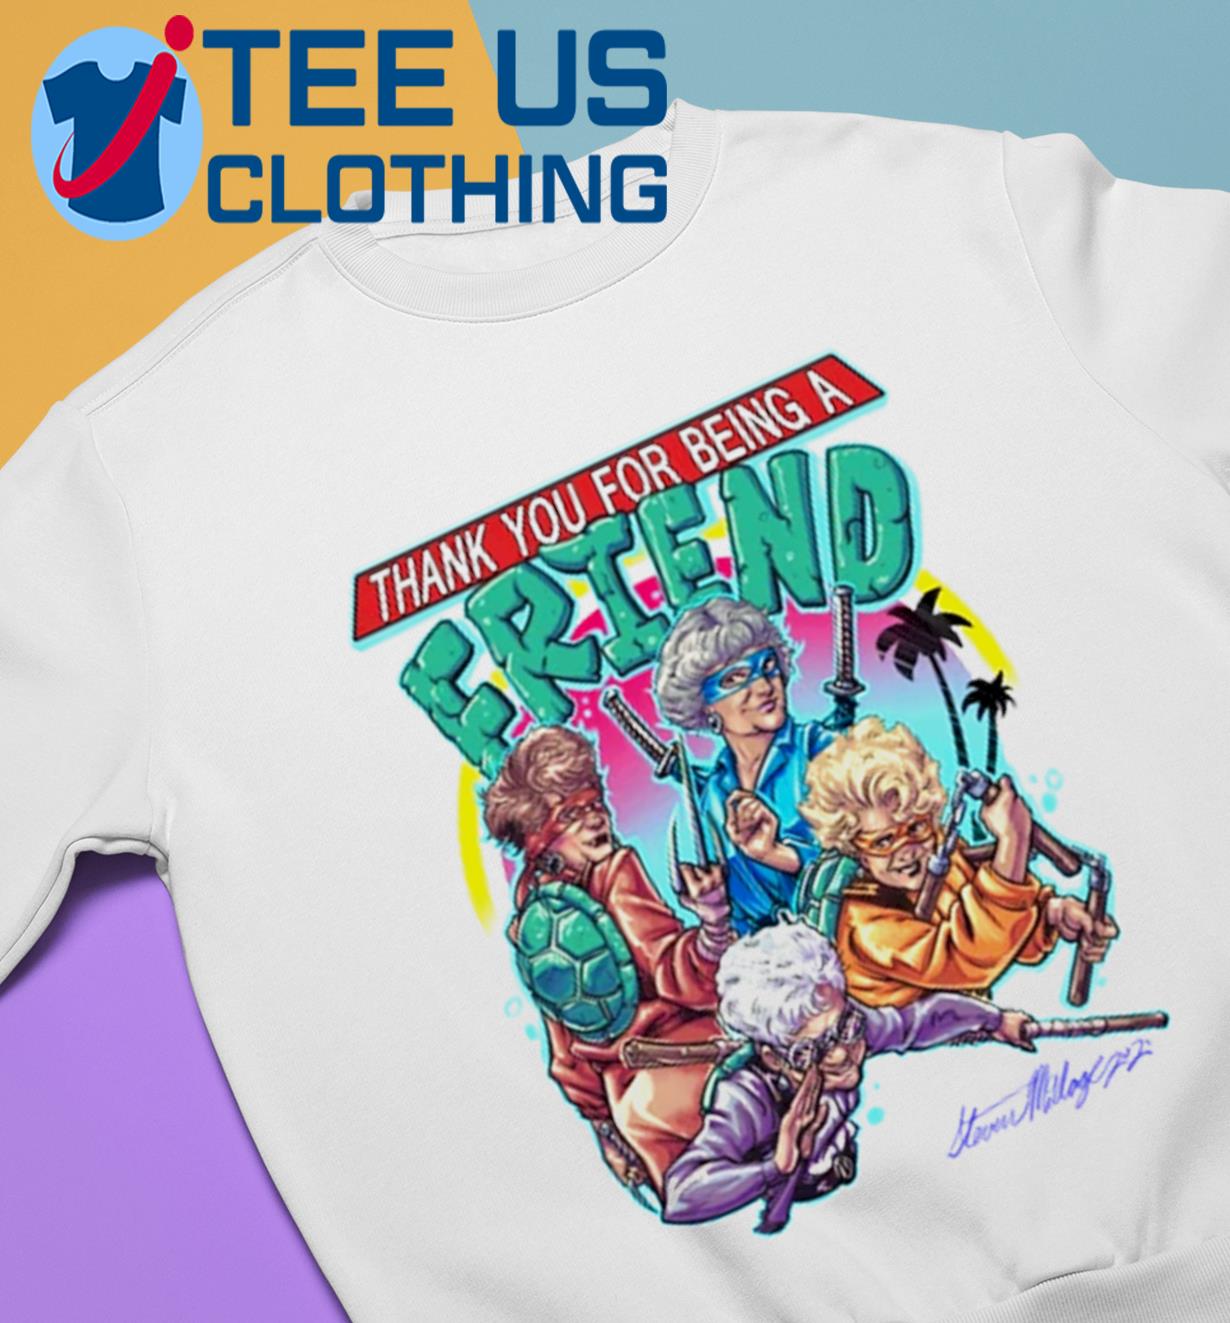 https://images.teeusclothing.com/2023/03/the-golden-girls-tmnt-thank-you-for-being-a-friend-shirt-sweater.jpg